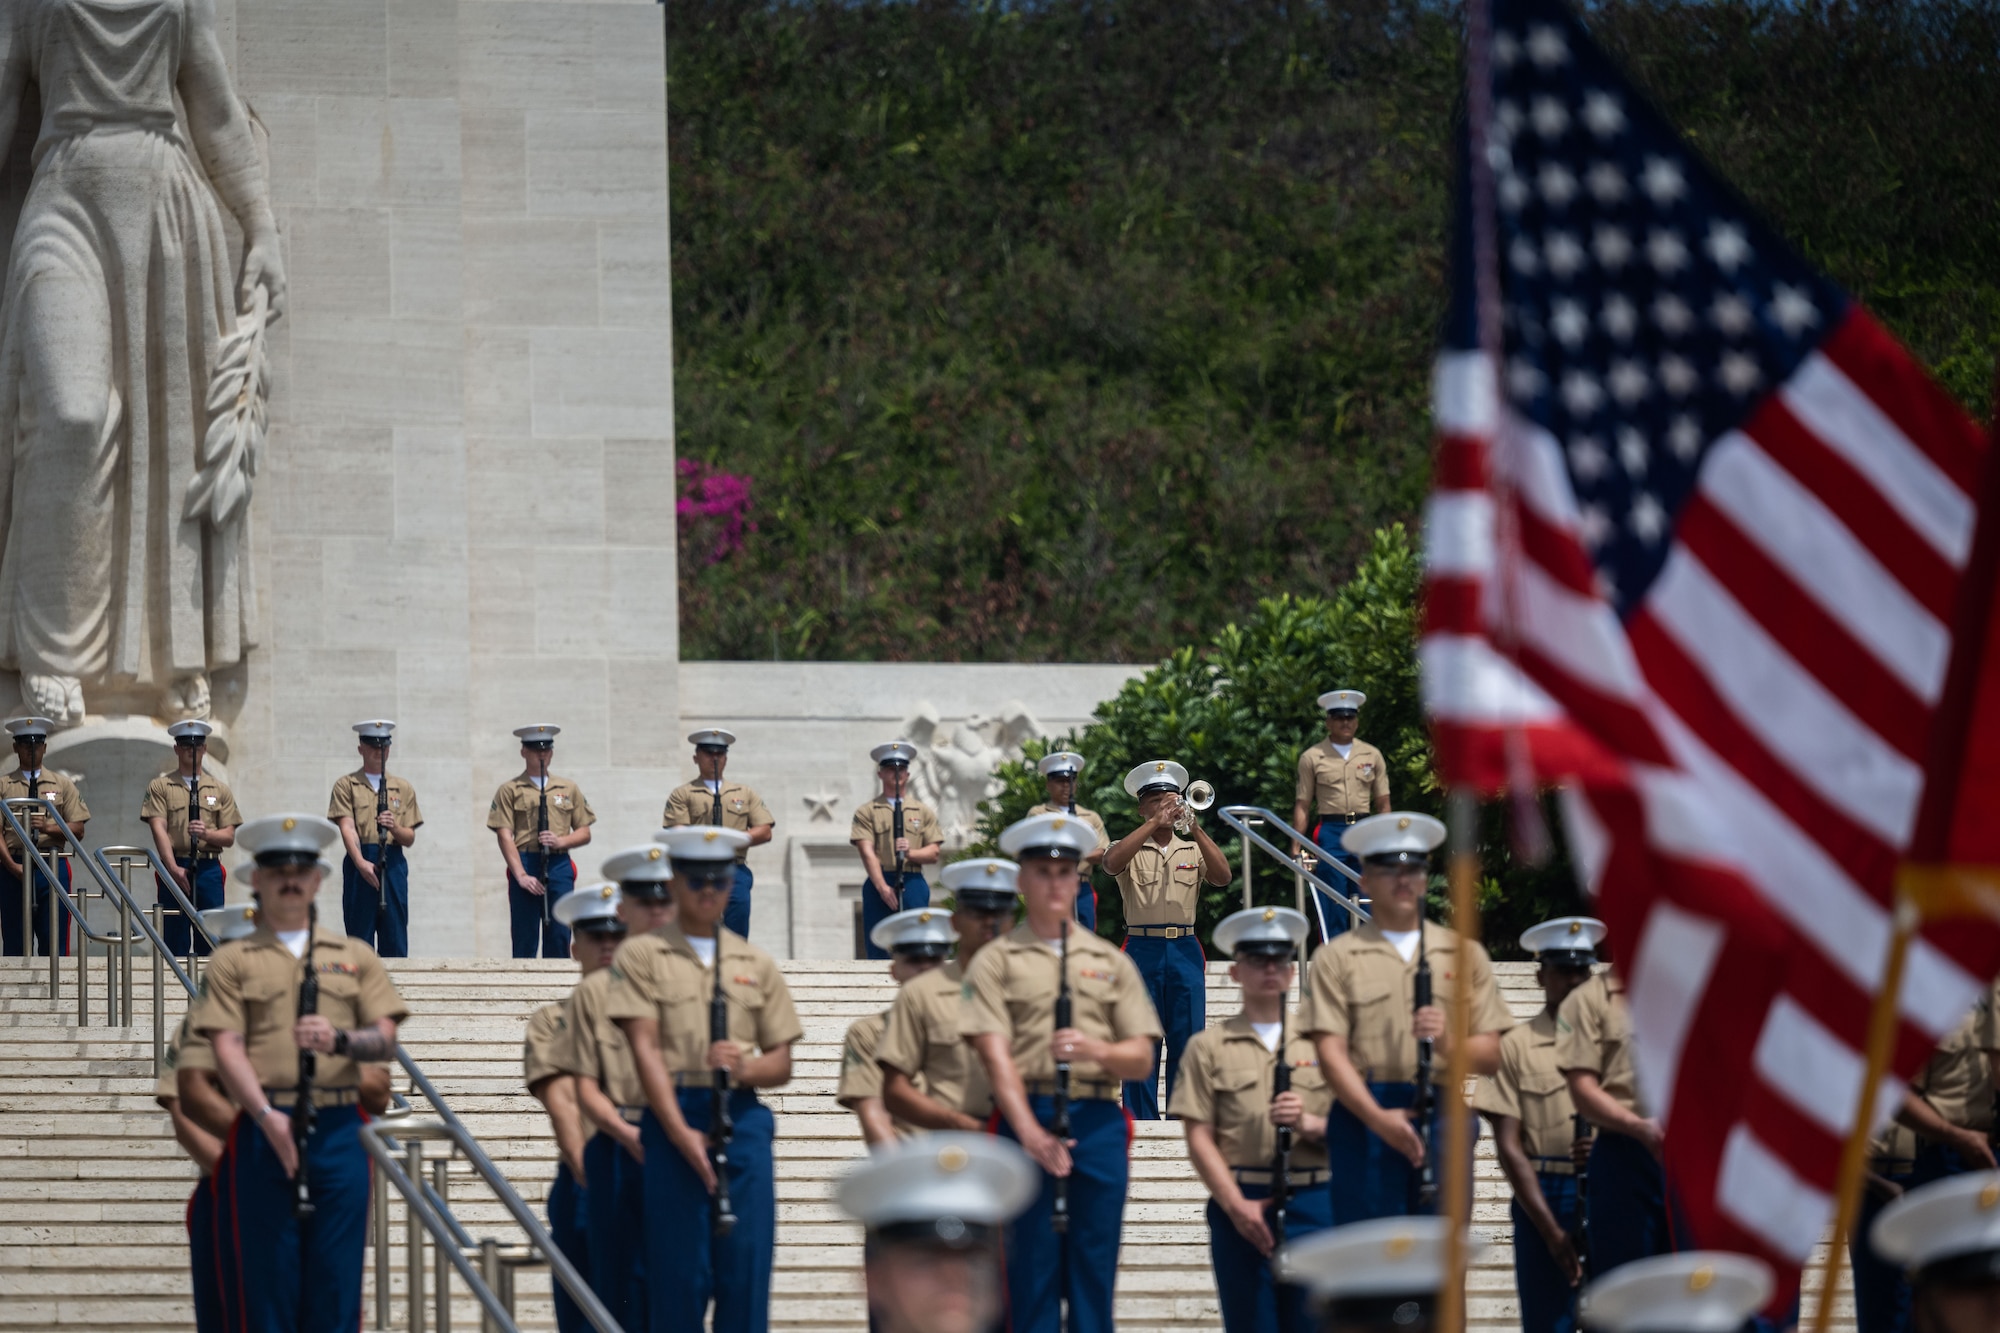 U.S. Marine Corps Sgt. Gregory Jacks (center), U.S. Marine Corps Forces Pacific Band, plays ‘The Last Post’ during Anzac, or Australian and New Zealand Army Corps, Day ceremony at the National Memorial Cemetery of the Pacific, Honolulu, Hawaii, April 25, 2022. Anzac Day has been observed annually in Honolulu since 1973. (U.S. Air Force photo by Tech. Sgt. Hailey Haux)